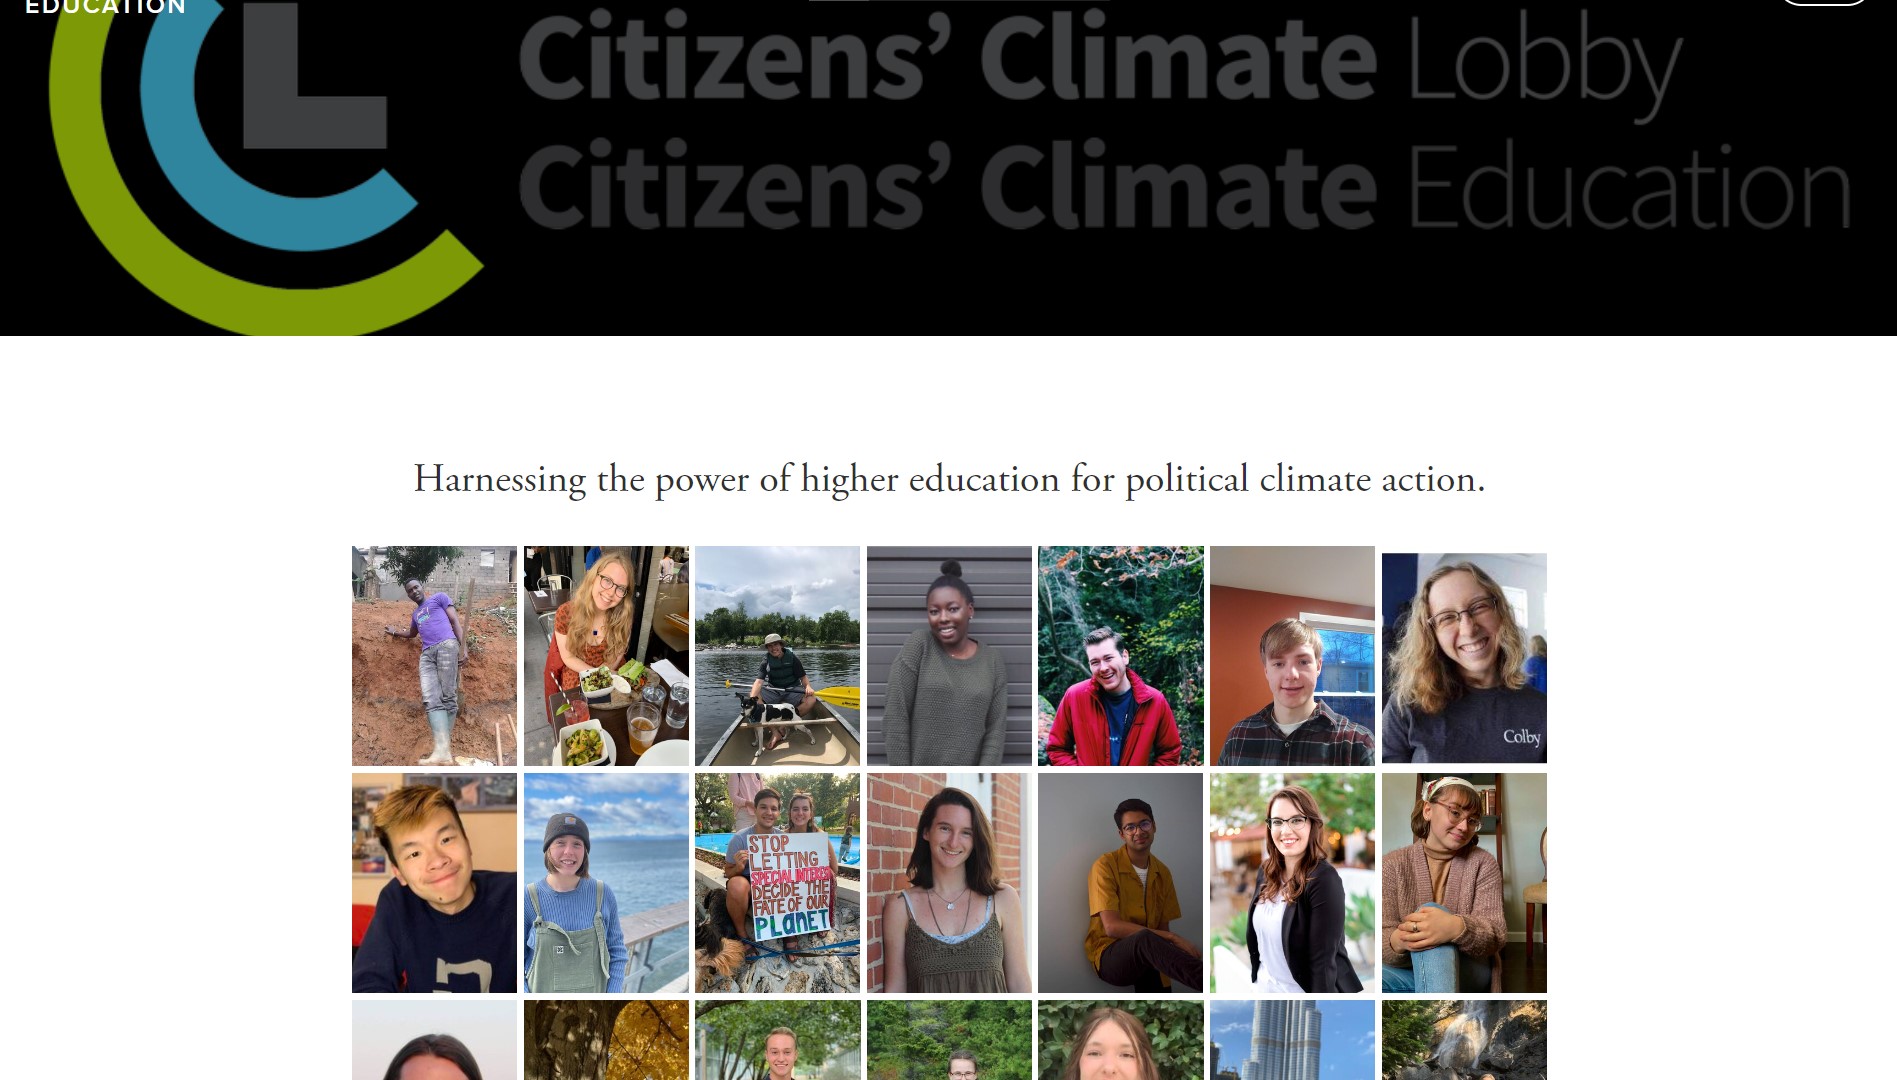 Citizens’ Climate Lobby/Citizens’ Climate Education